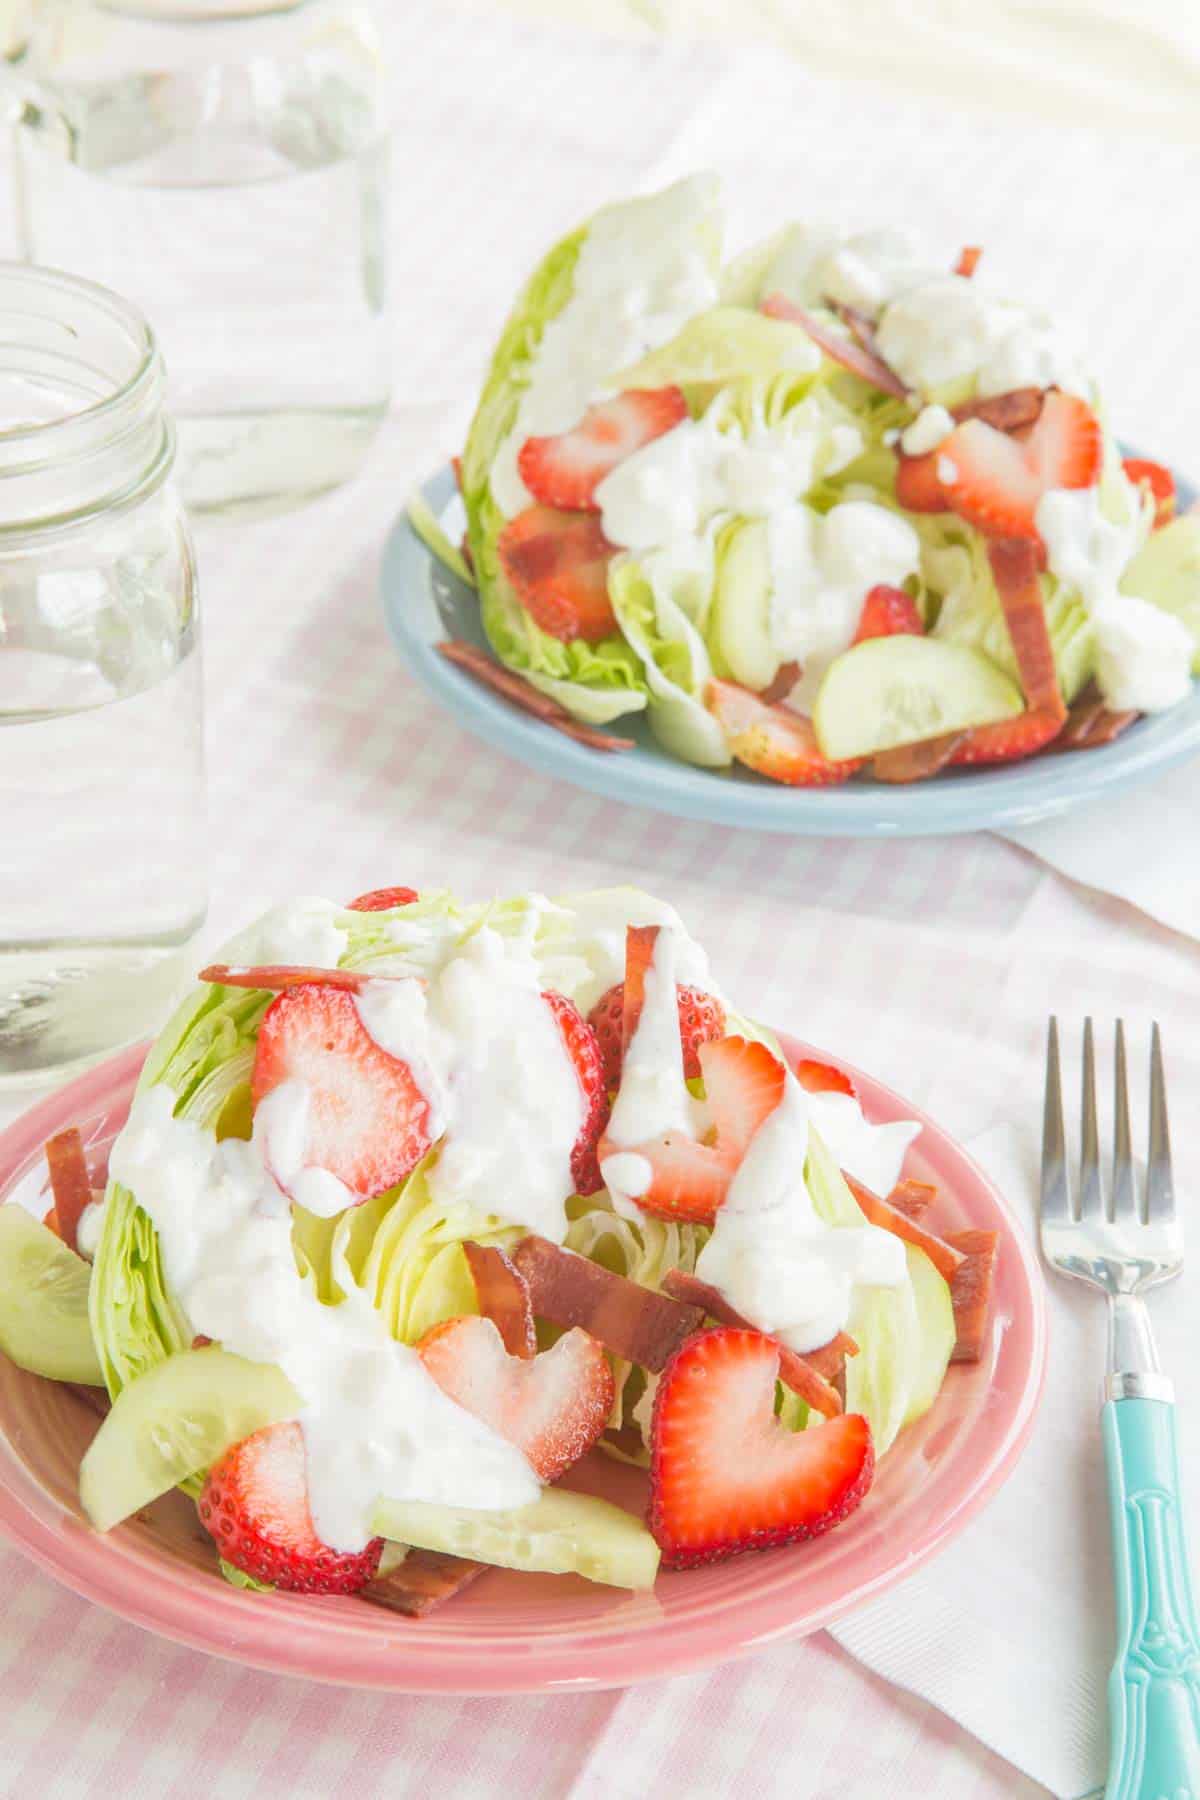 Two plates of an iceberg lettuce wedge topped with bacon, sliced strawberries and cucumbers, and blue cheese dressing.